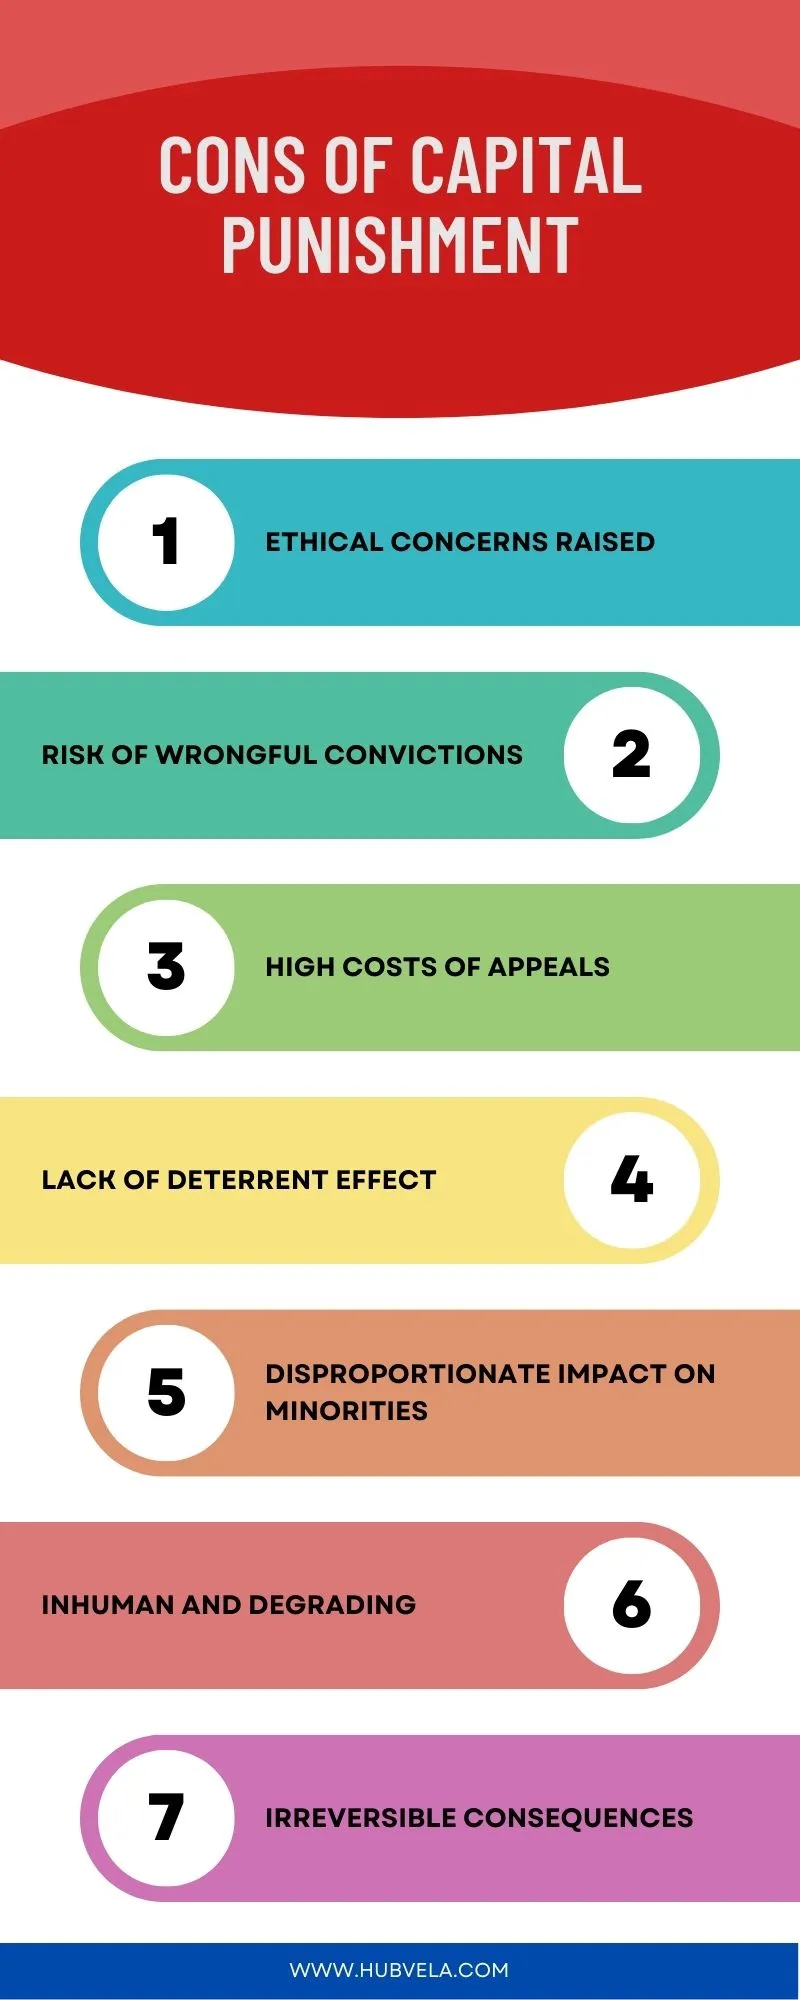 Cons of Capital Punishment Infographic